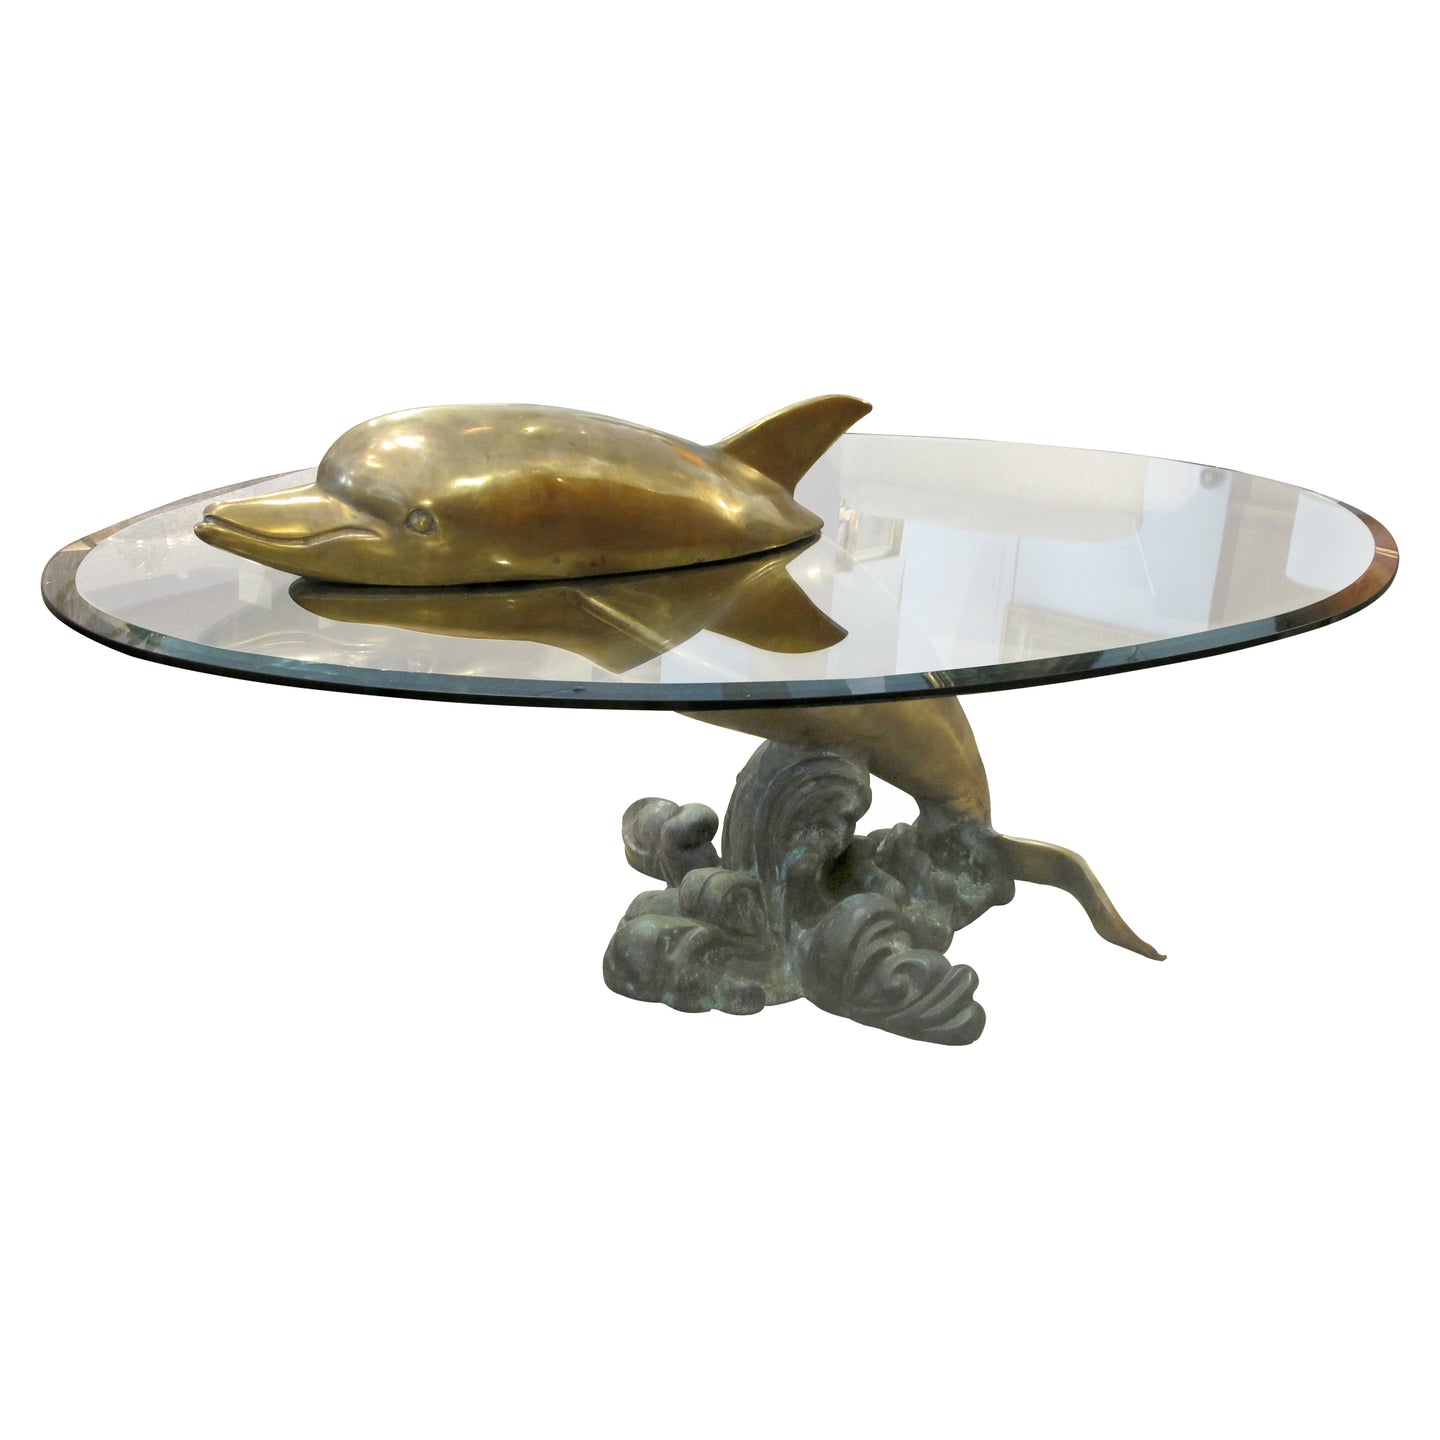 1960s French Brass Coffee Table in the shape of a Dolphin with an Oval Glass Top